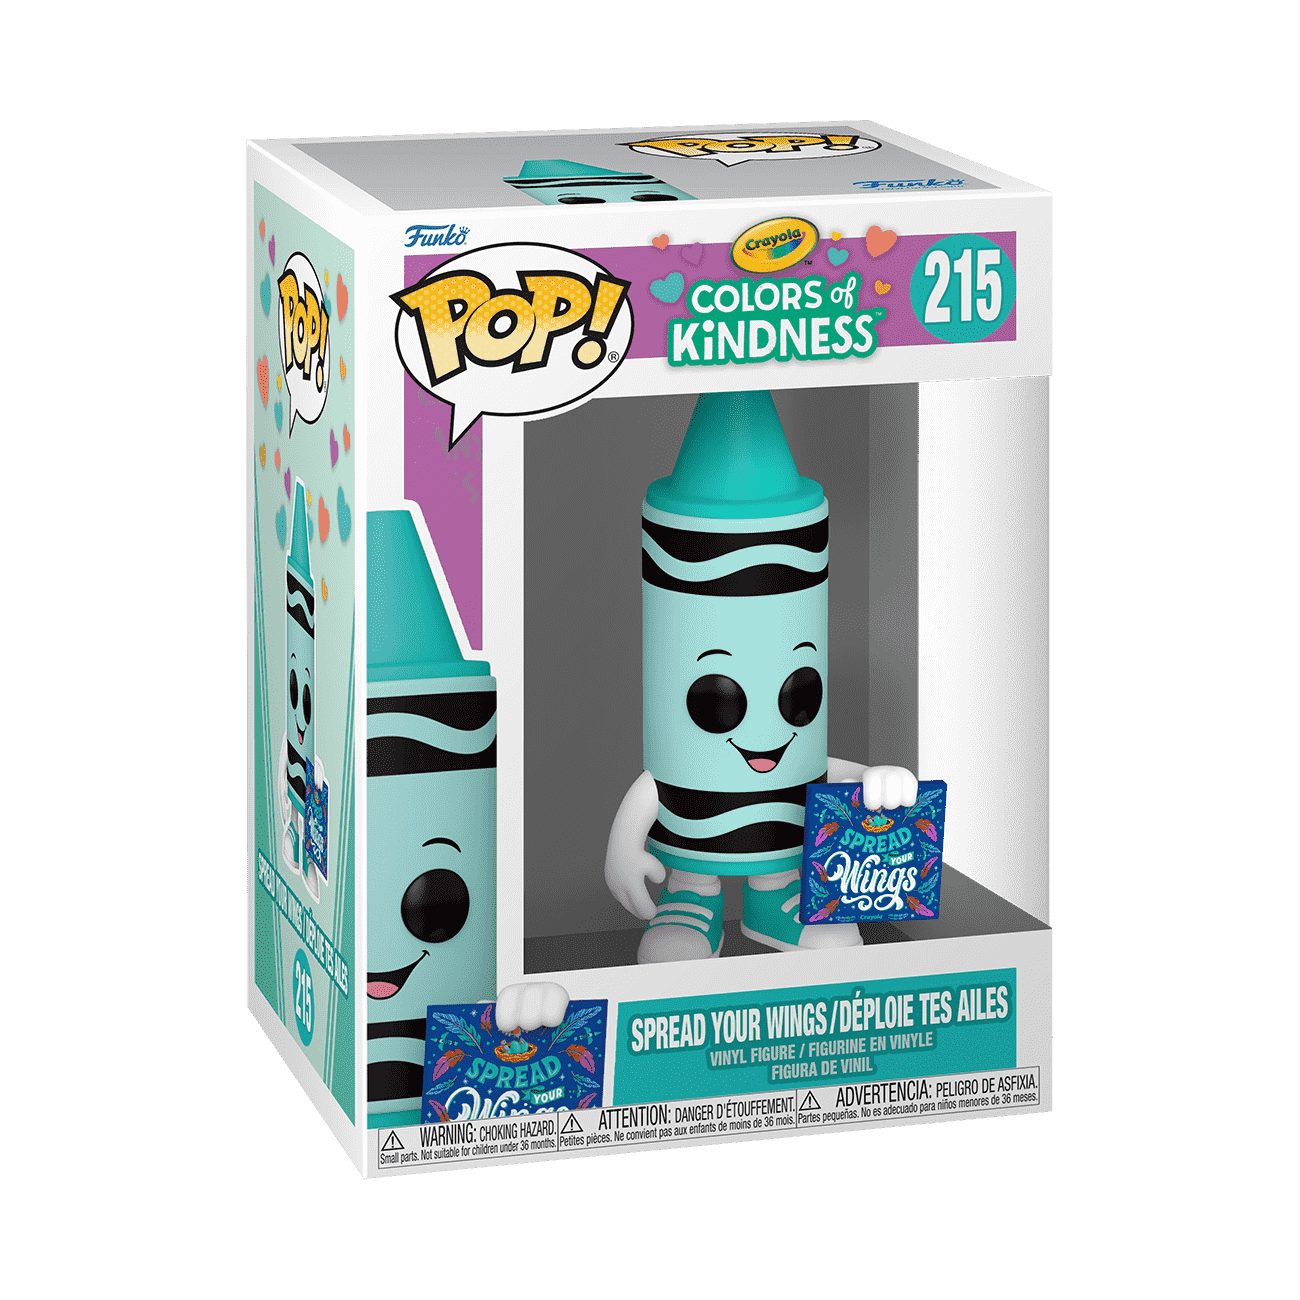 Buy Pop! Spread Your Wings (Robin’s Egg Blue) at Funko.